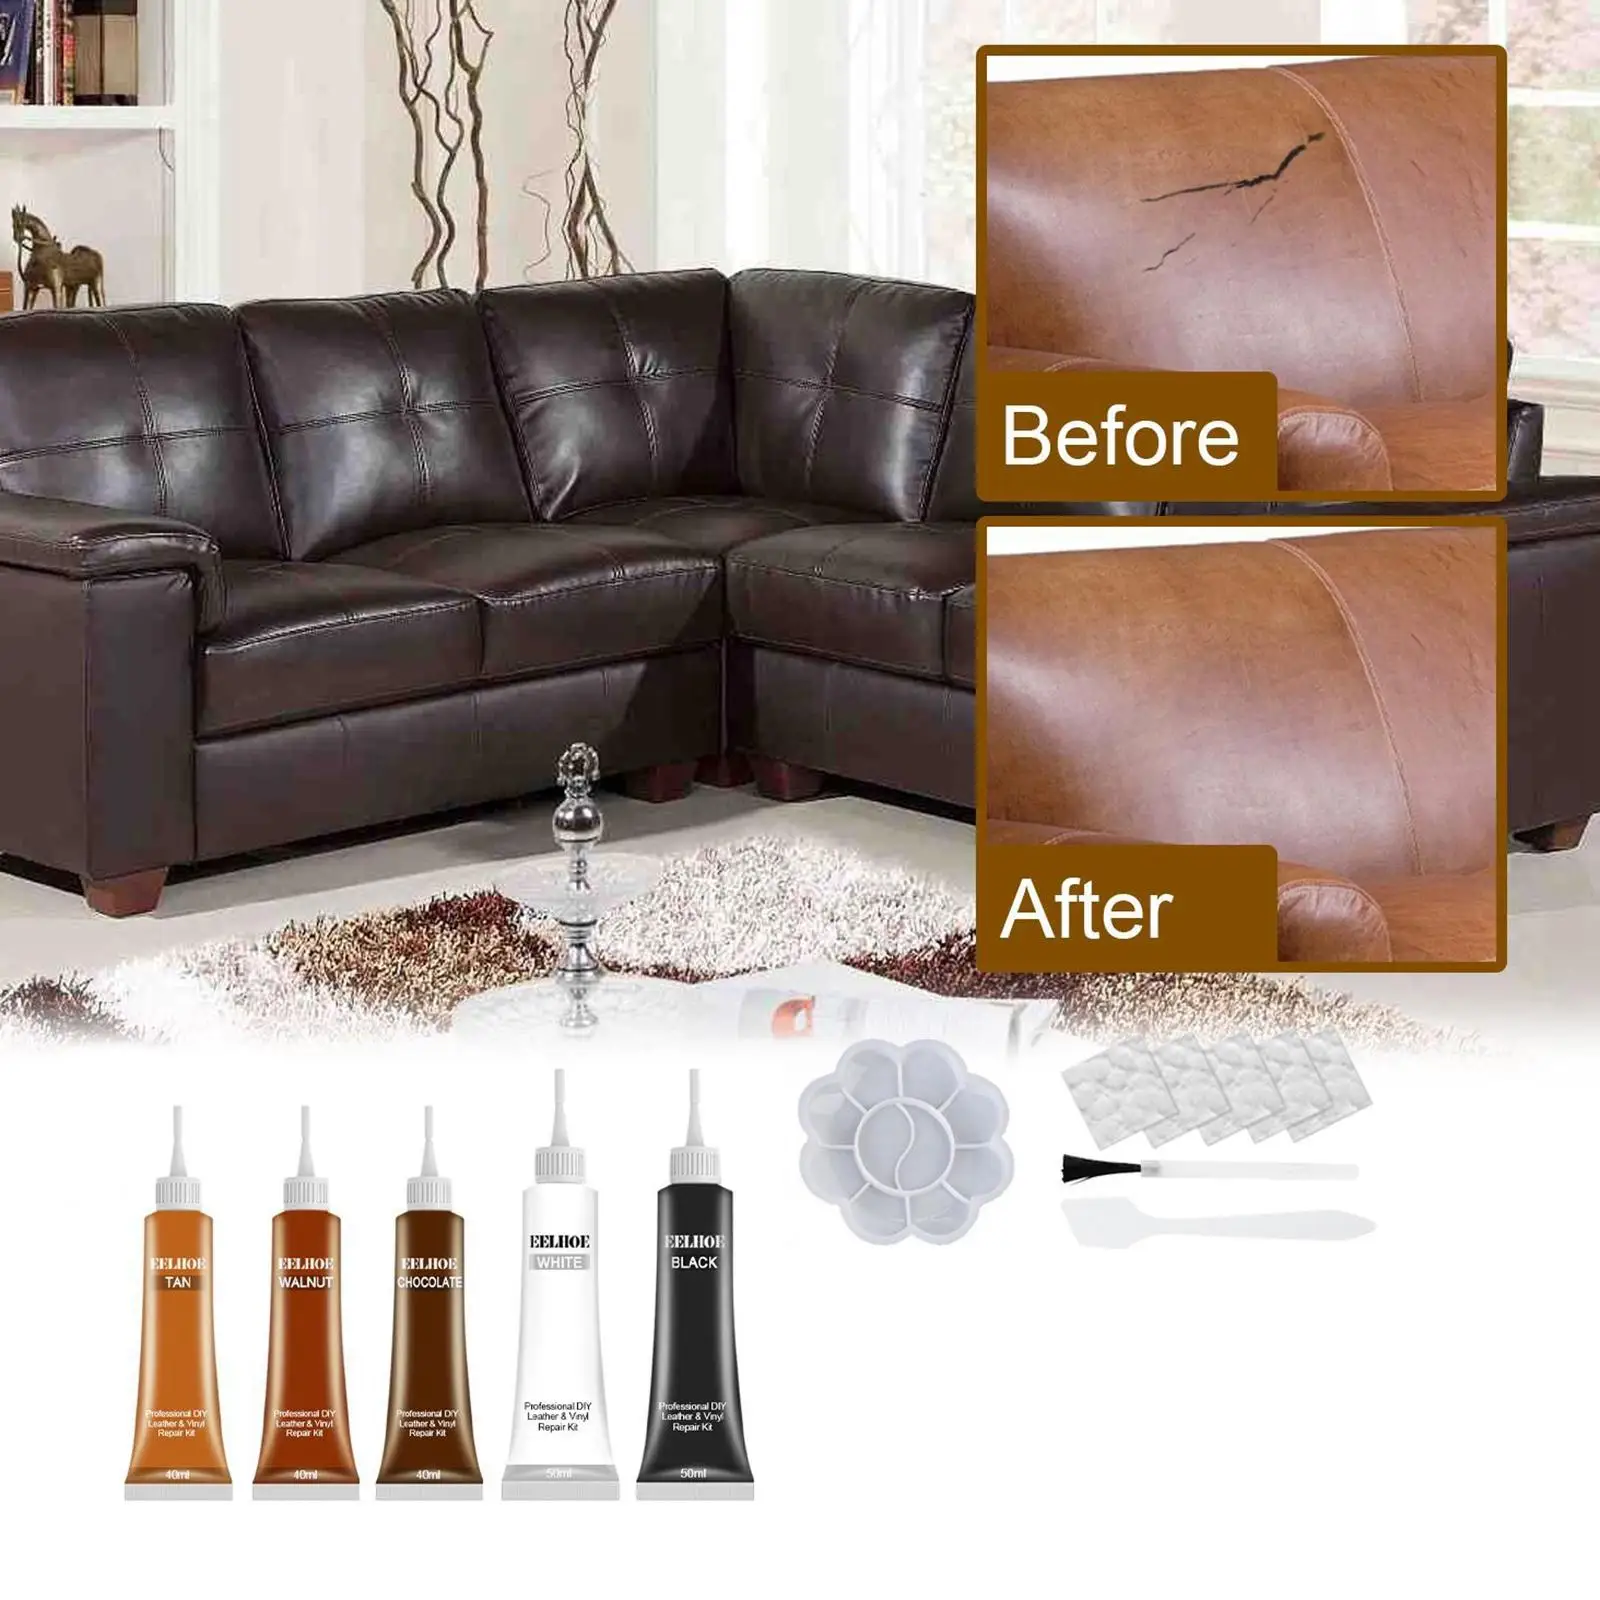   Accessories for Leather Cleaner  Couch Auto Seat Furniture